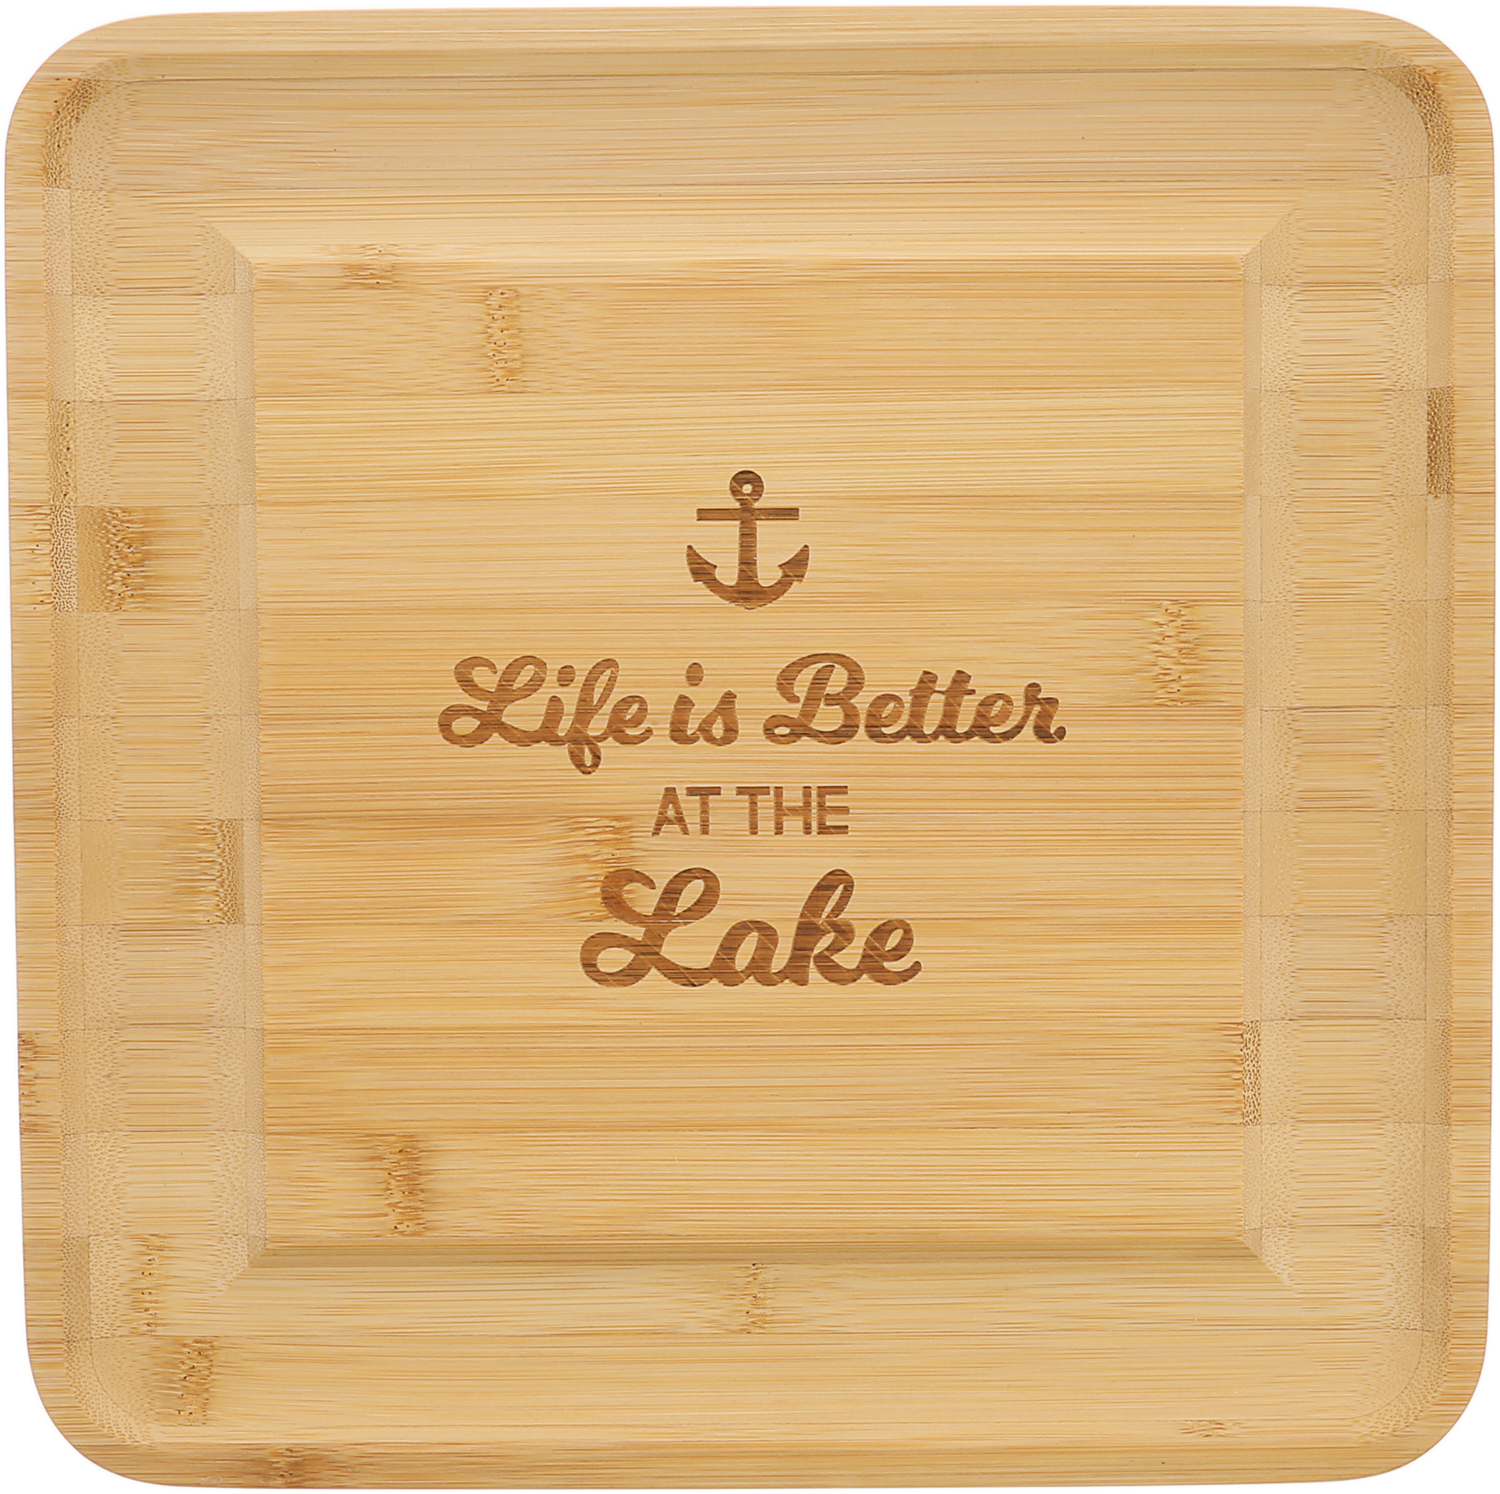 At The Lake by We People - At The Lake - 13" Bamboo Serving Board with Utensils